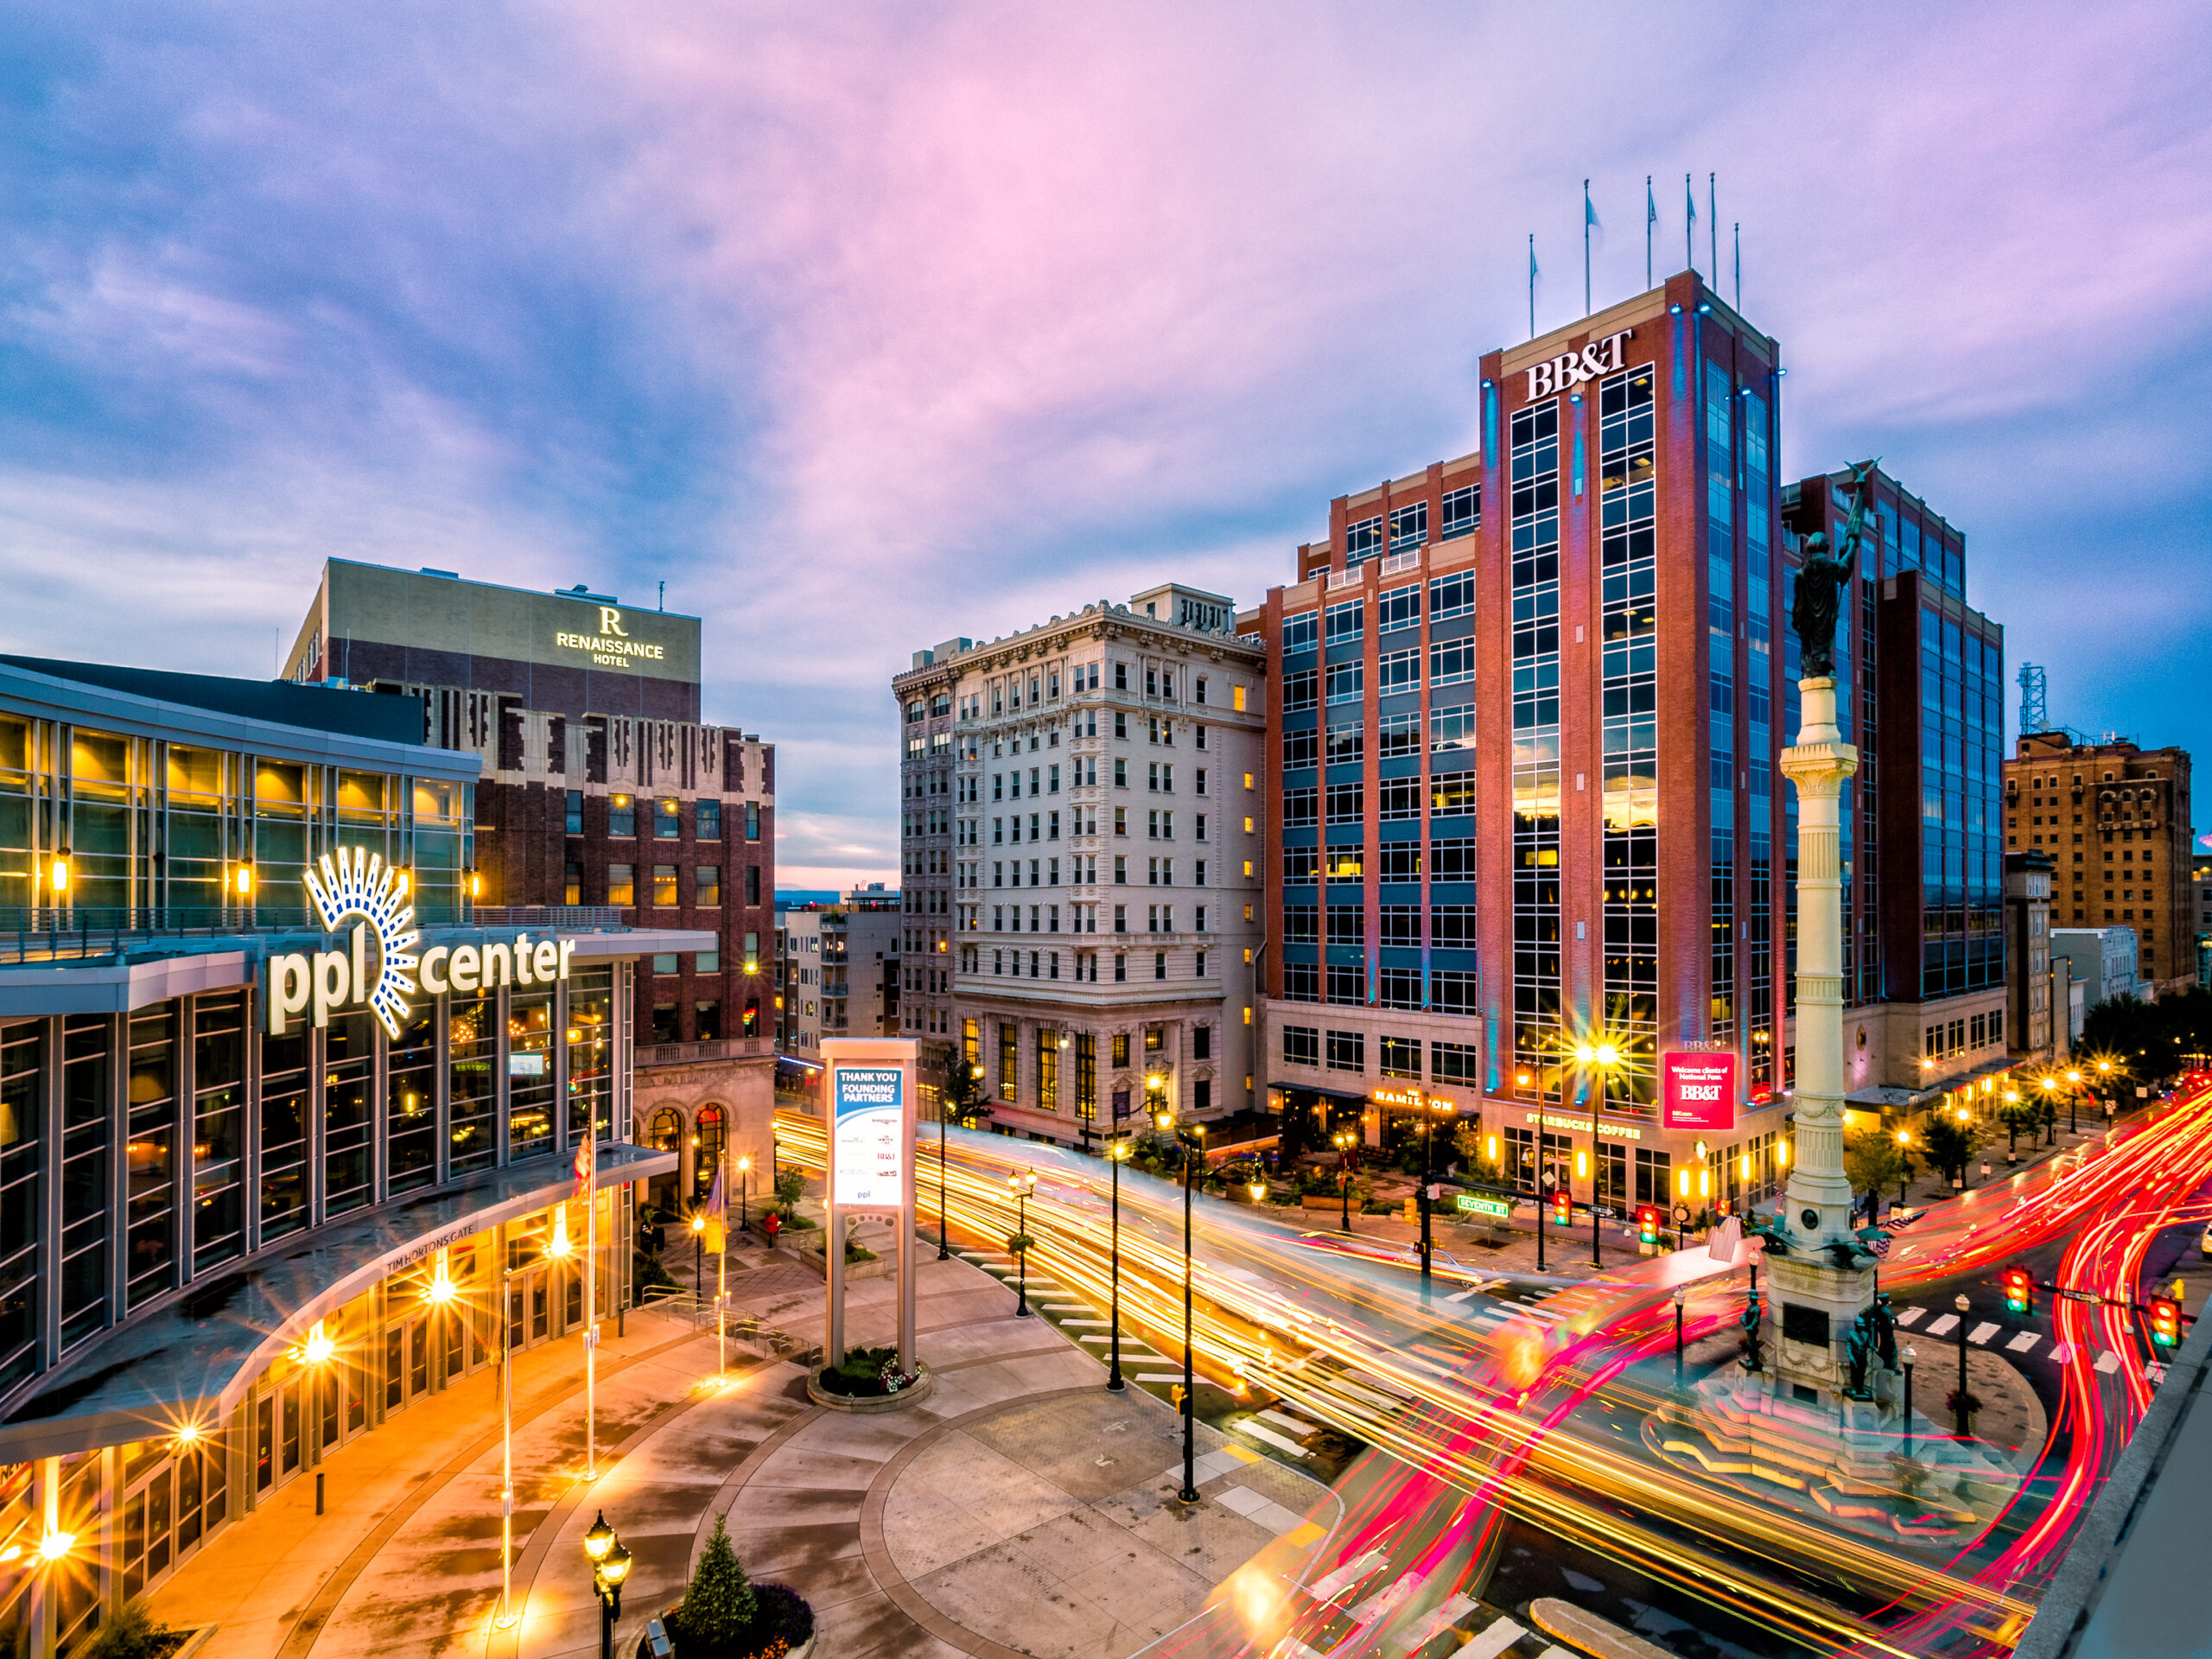 Allentown, PA | Find Hotels, Events, Attractions & Restaurants